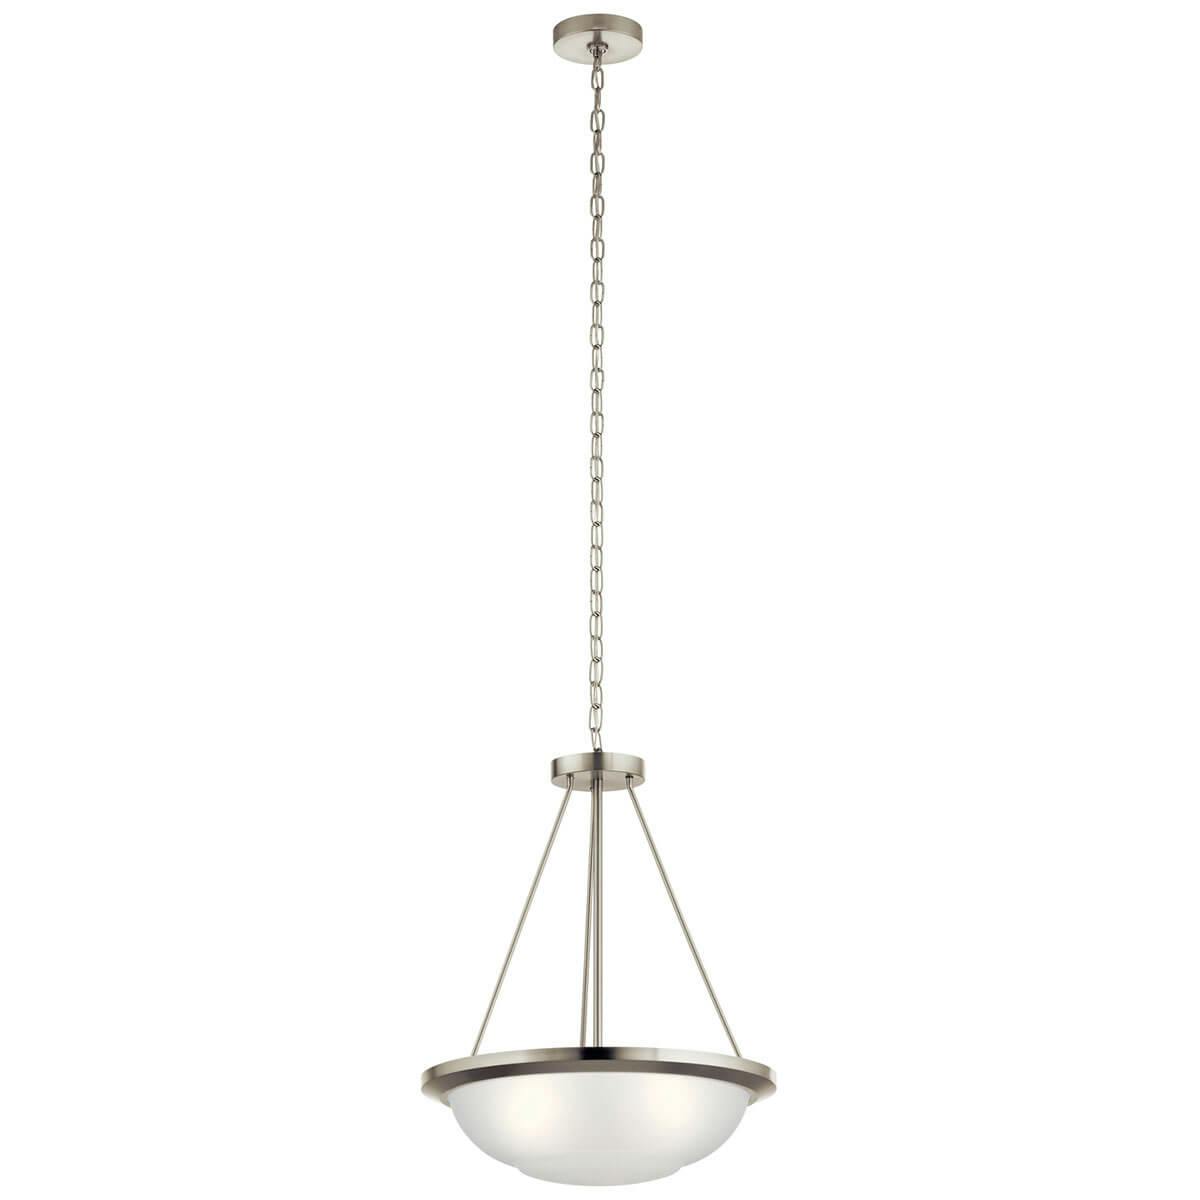 Ritson 3 Light Inverted Pendant Nickel on a white background